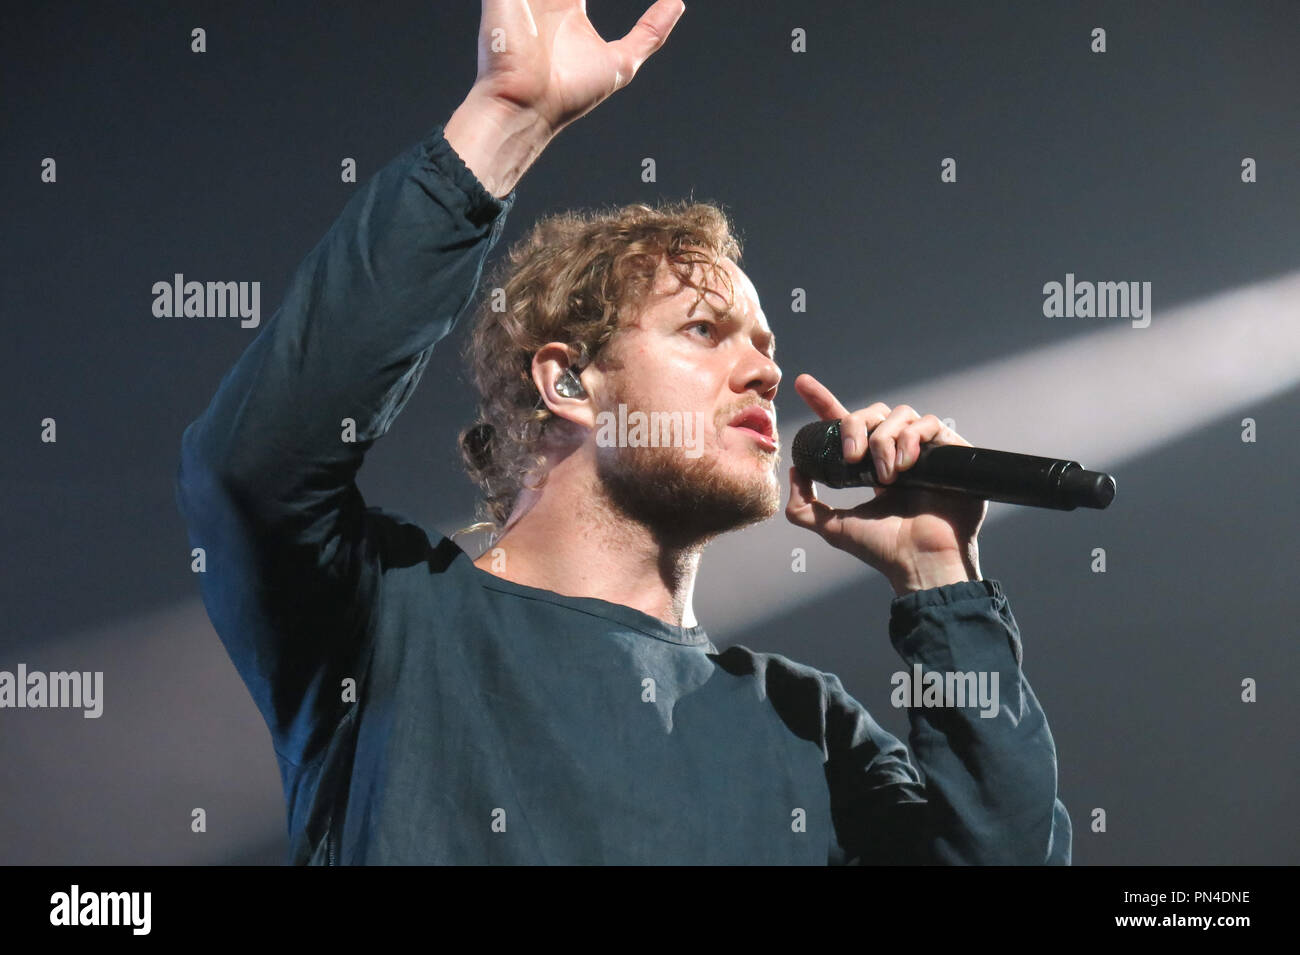 Imagine Dragons Live at the Honda Center in Anaheim, CA, July 20, 2015. Dan Reynolds. Photo by Richard Chavez / PictureLux Stock Photo